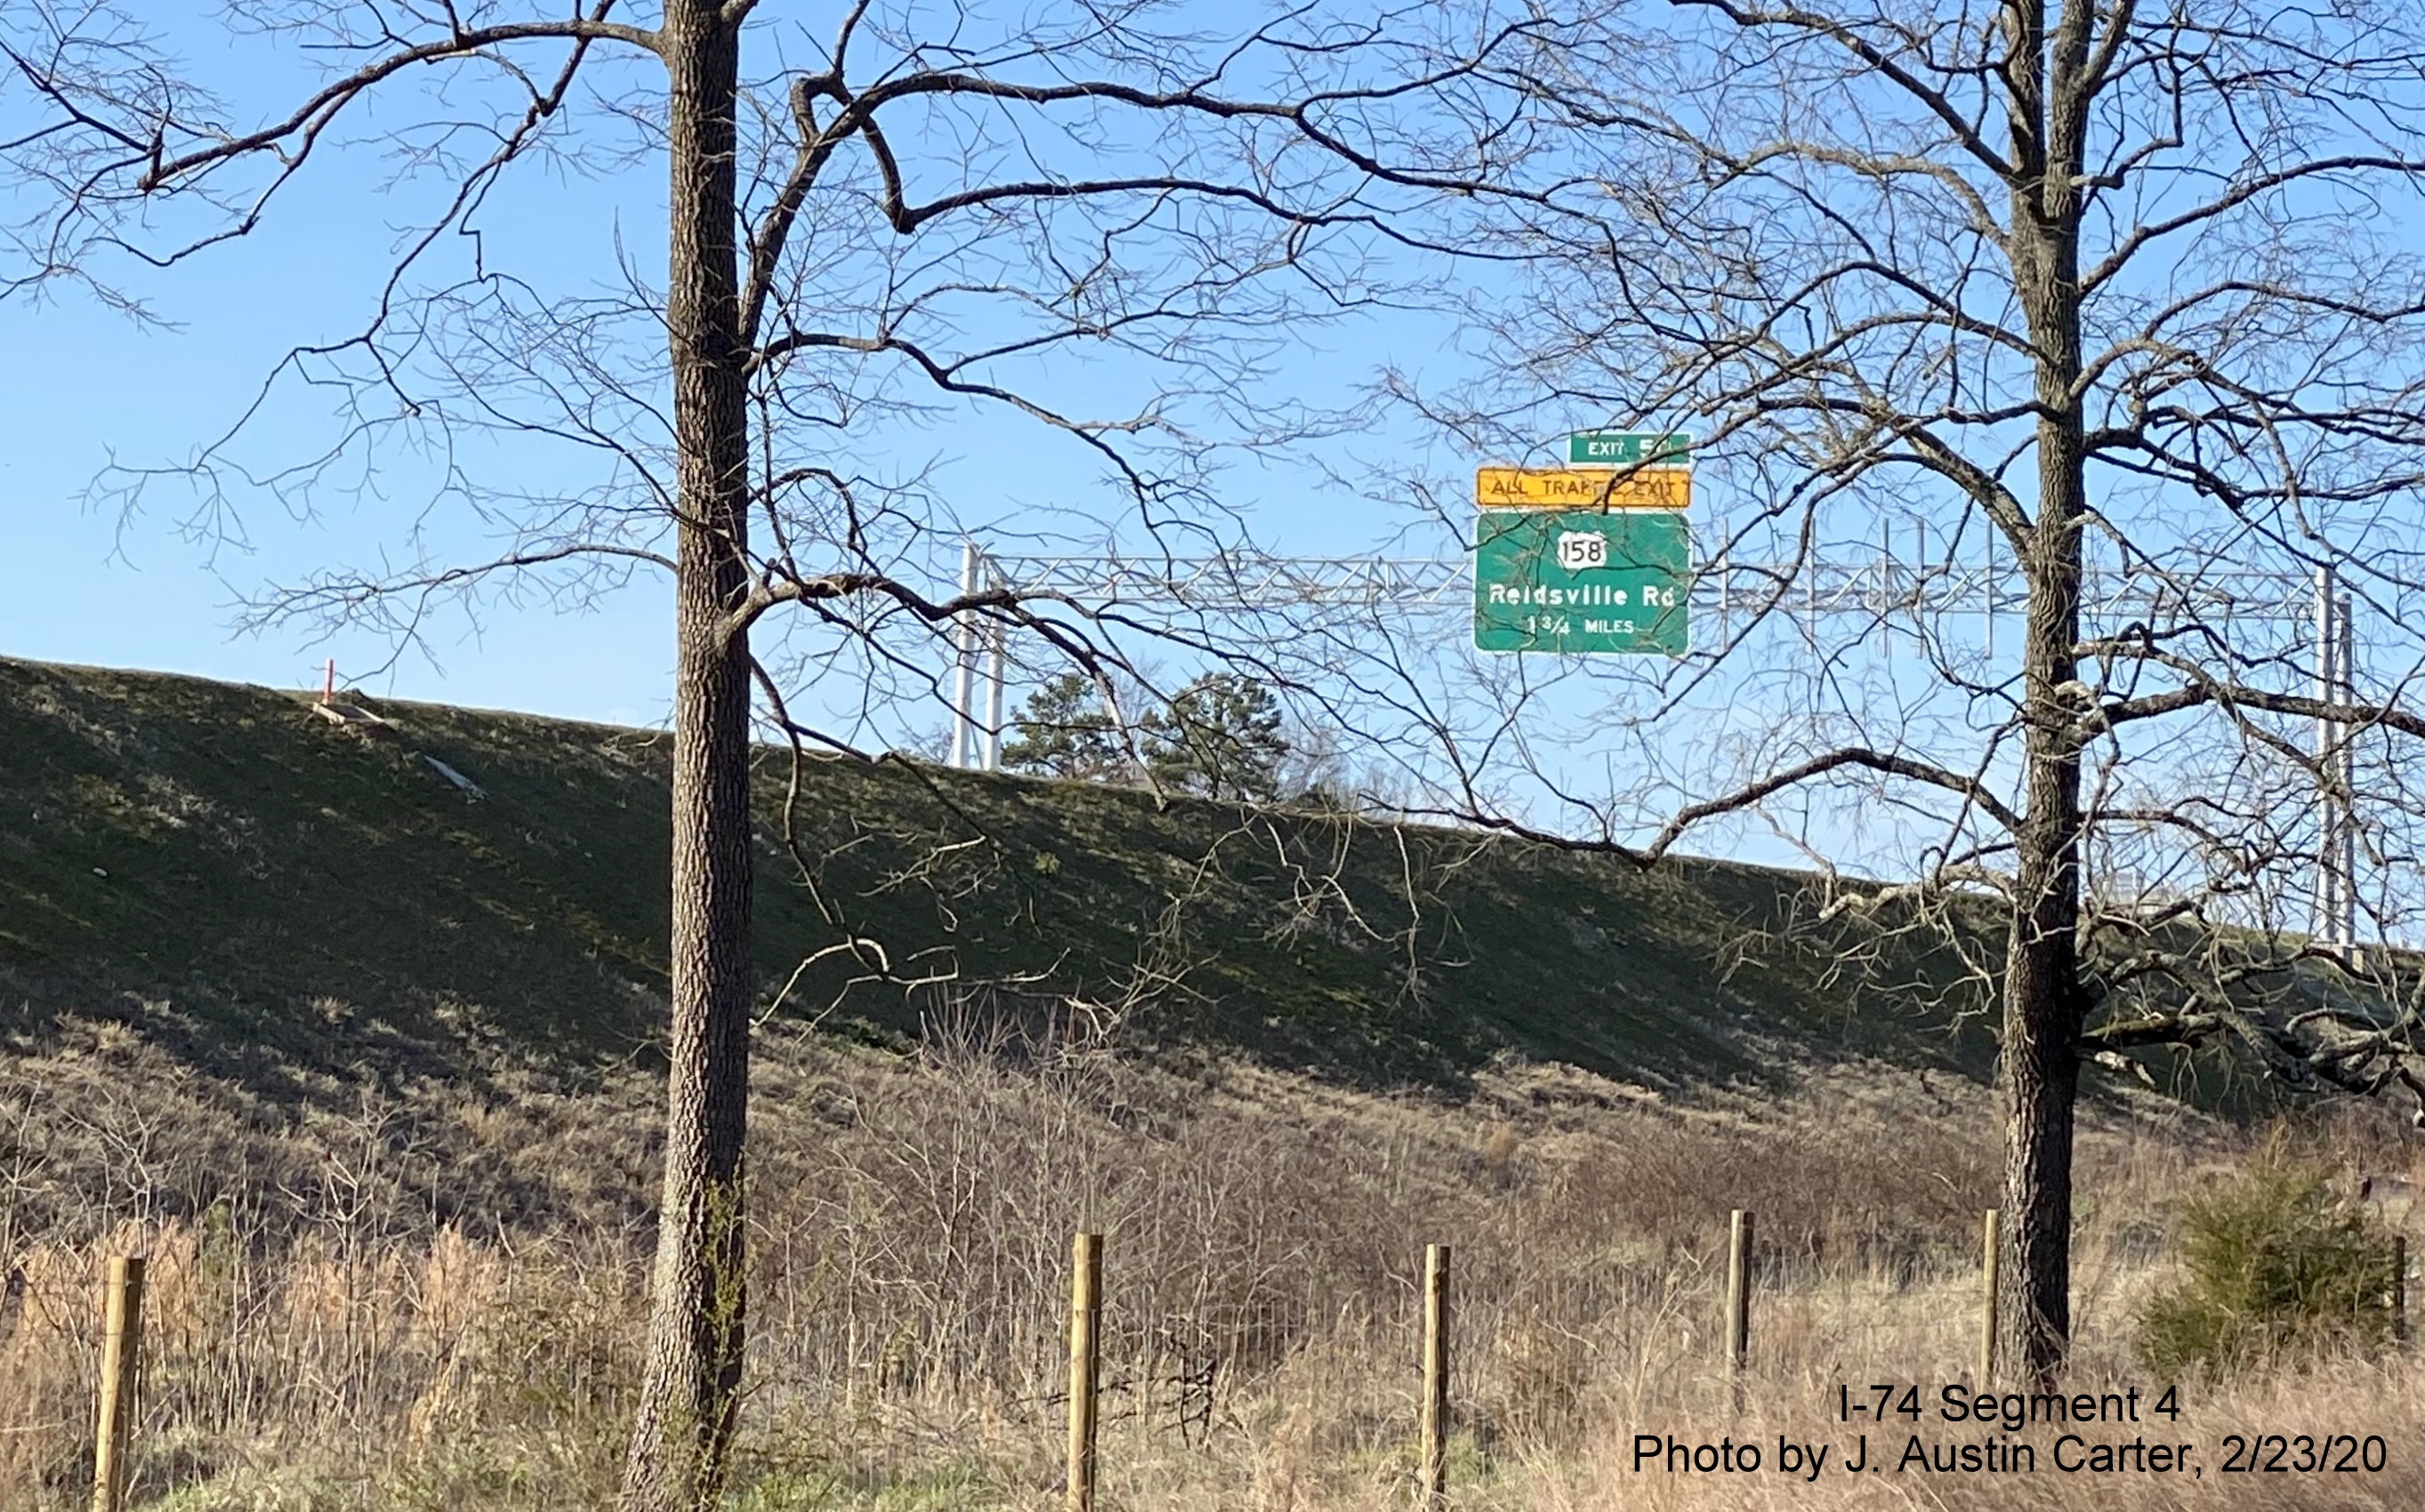 Image of overhead signage for US 158 exit in vicinity of West Mountain Street bridge with Future 
        I-74/Winston-Salem Beltway, by J. Austin Carter in Feb. 2020